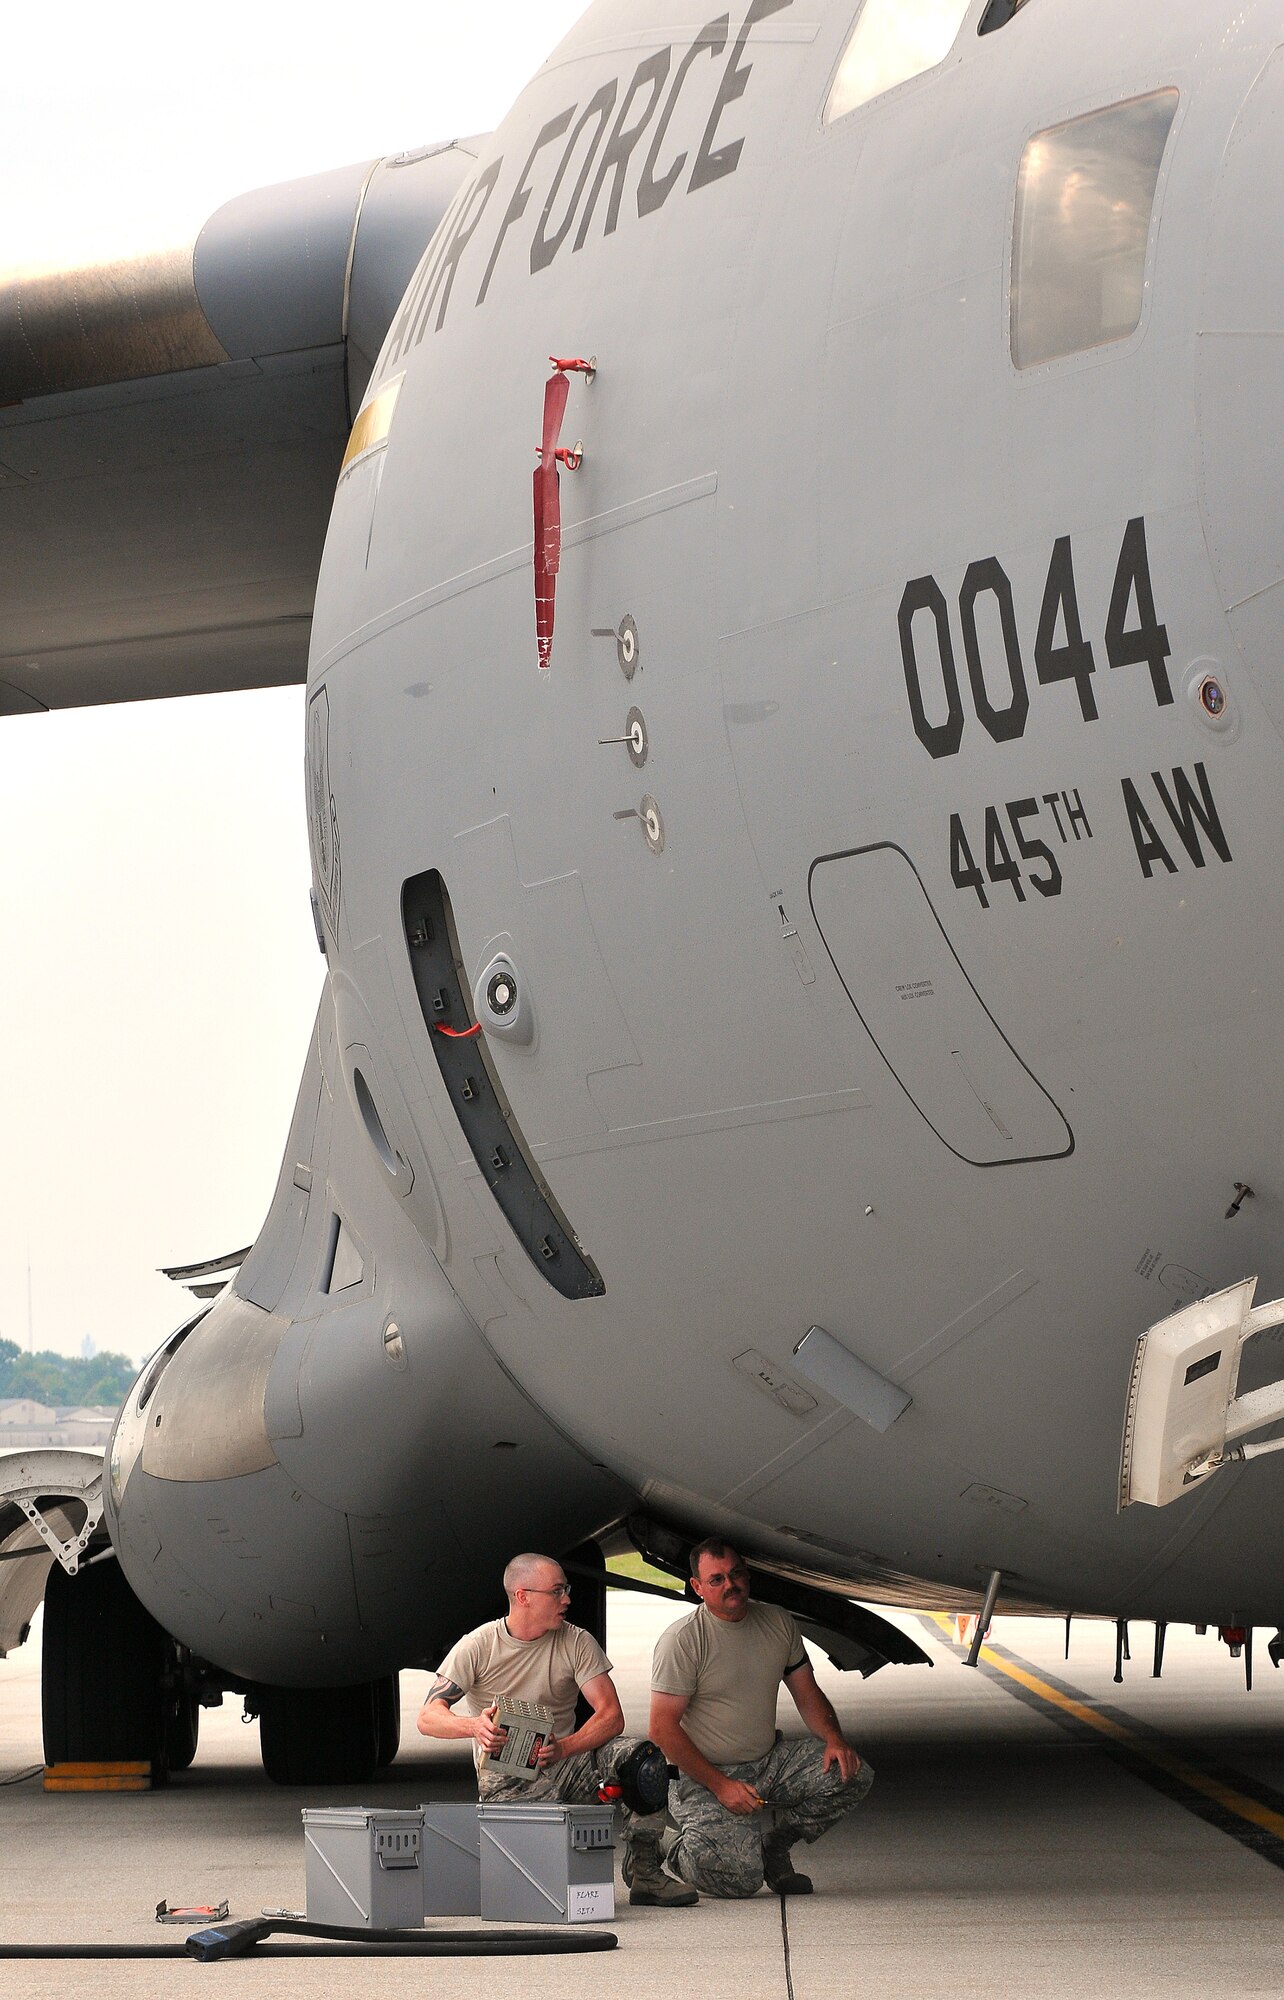 WRIGHT-PATTERSON AIR FORCE BASE, Ohio - Members of the 445th Aircraft Maintenance Squadron perform checks on a C-17 Globemaster III on the flightline here July 12, 2014. The 445 AMXS is continuing their above average trend for mission capable rate for the wing’s fleet of nine C-17s. (U.S. Air Force photo/Tech. Sgt. Frank Oliver)